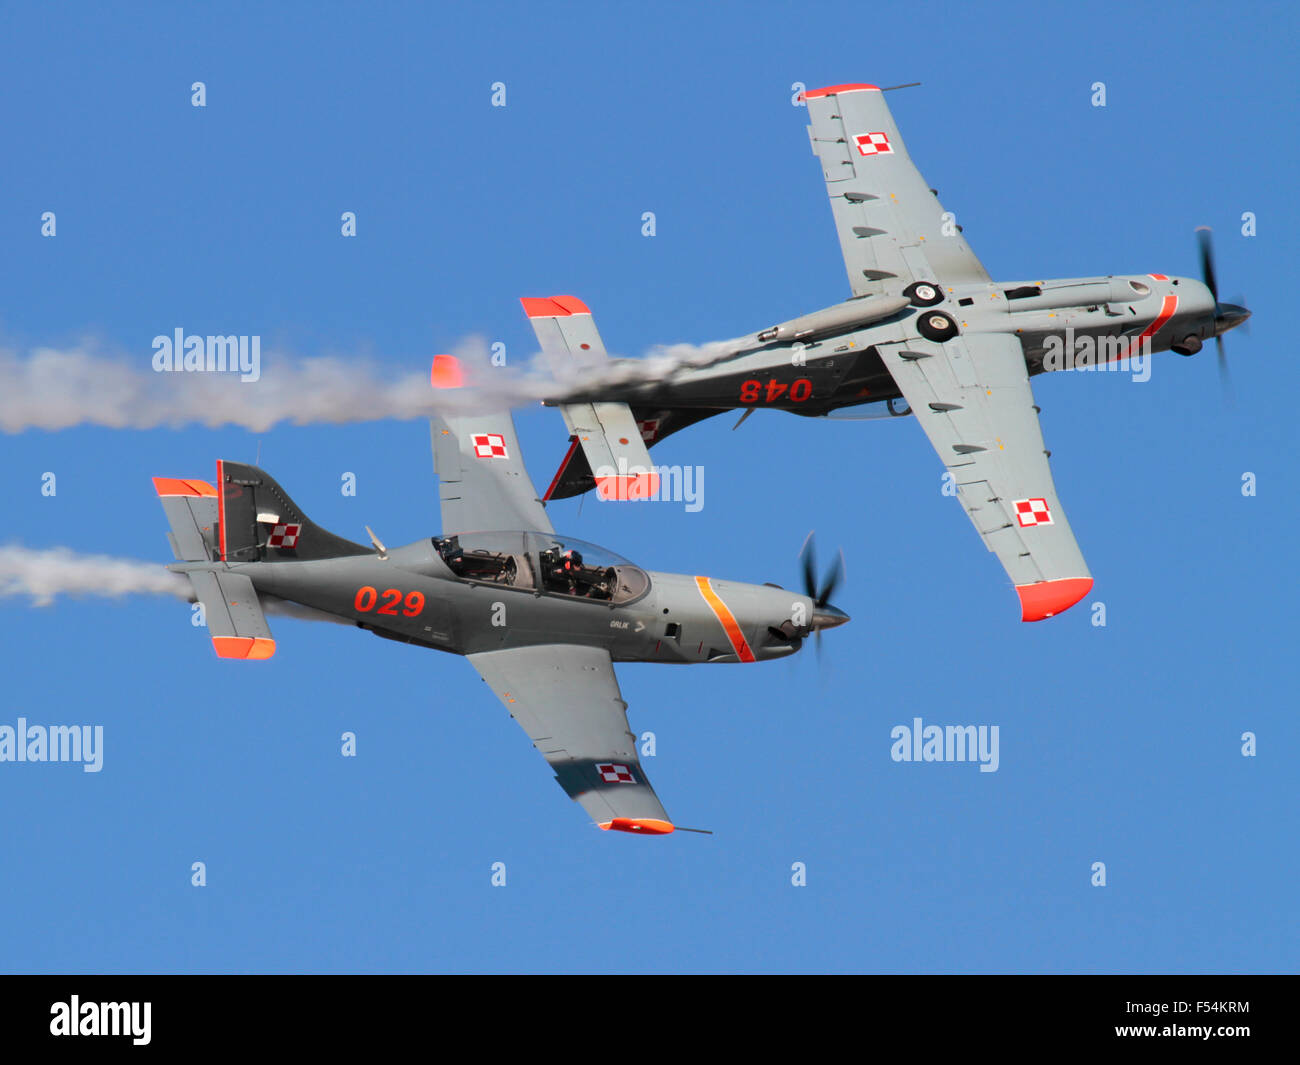 PZL-130 Orlik propeller powered trainer planes of the Polish Air Force flying in formation during an air display. Military aviation. Stock Photo